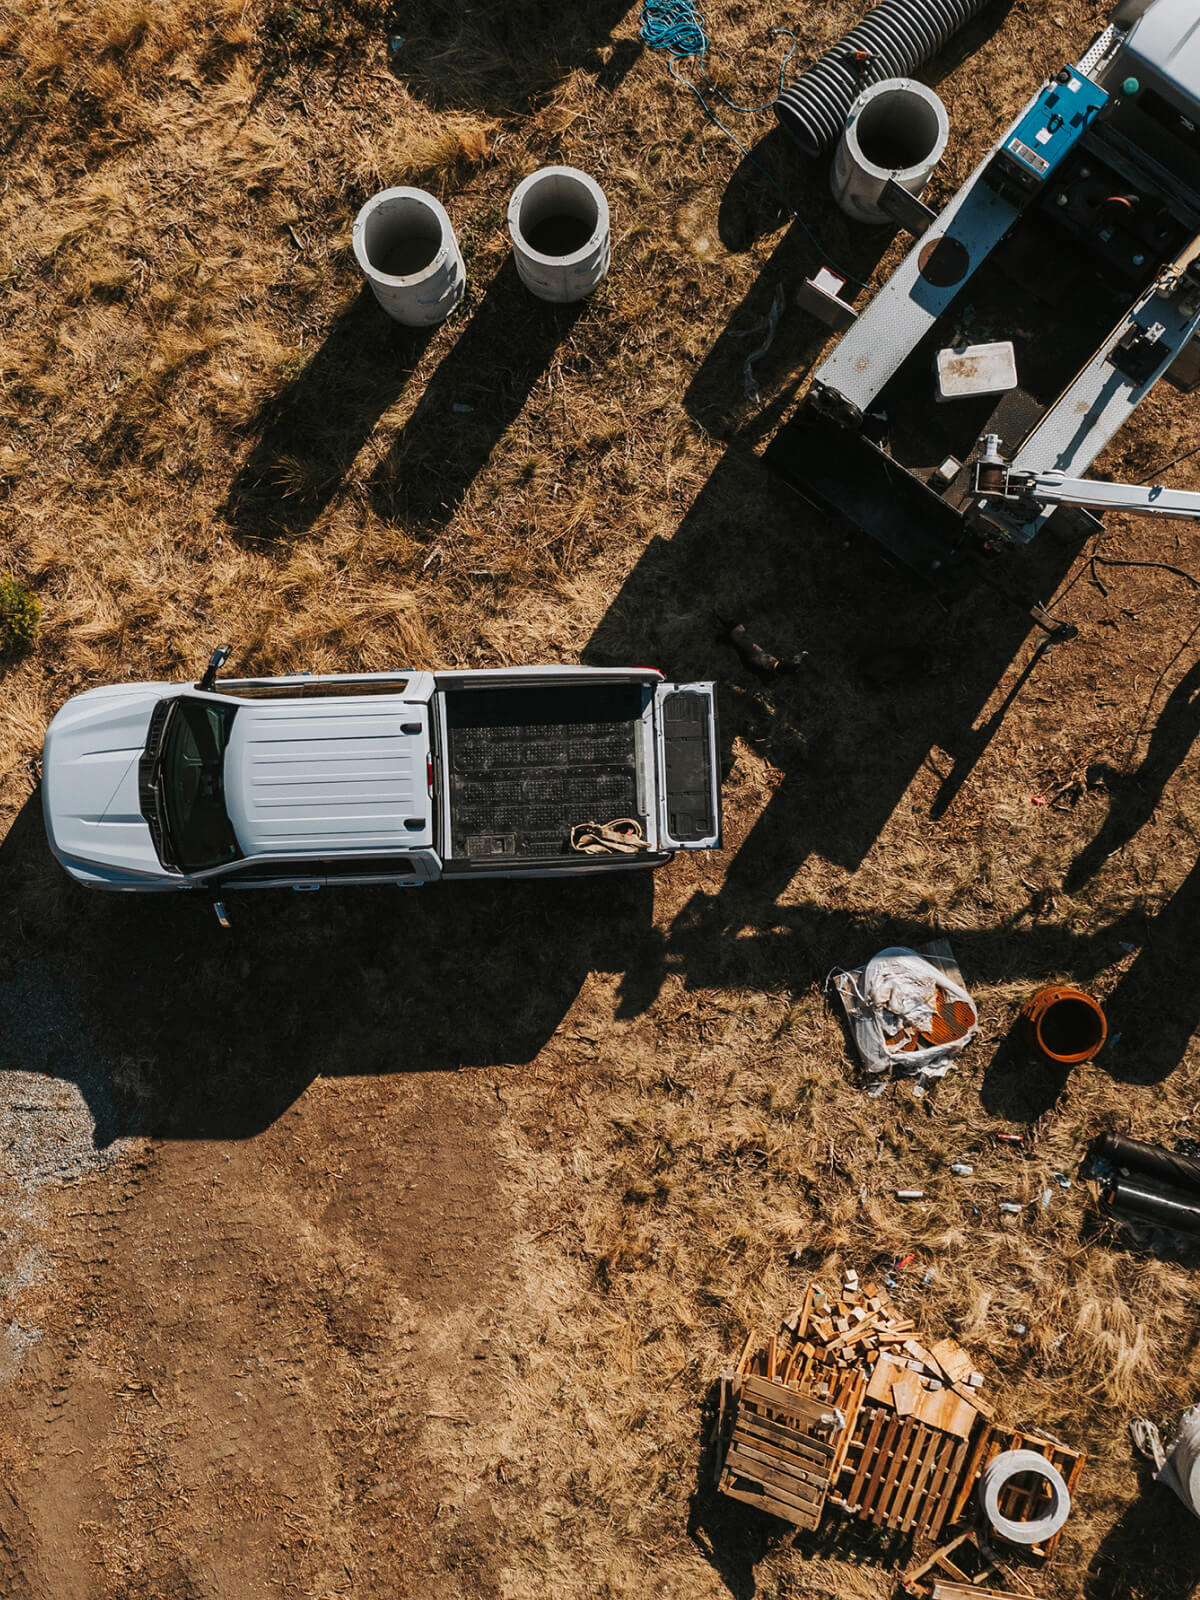 Overhead view of trucks at a construction site